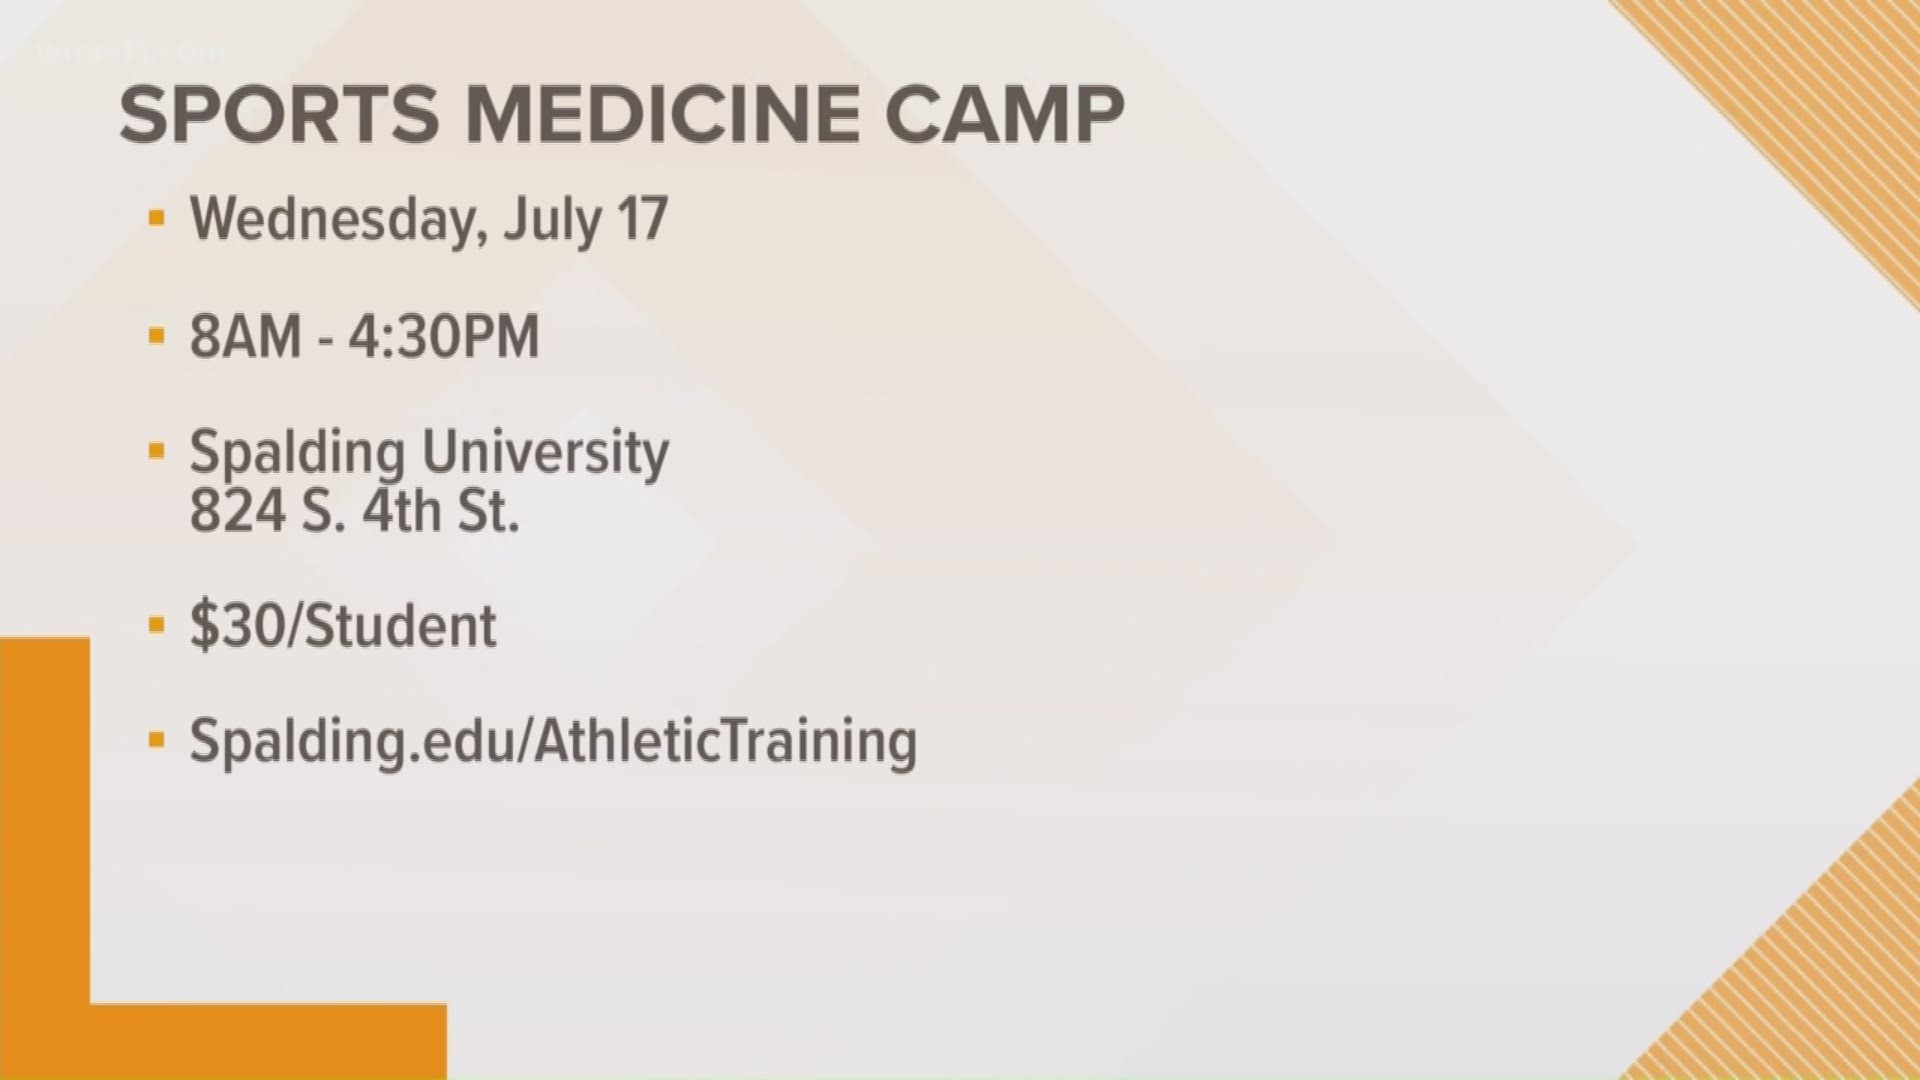 A one-day hands-on workshop providing high school students with an inside look at sports medicine and athletic training.